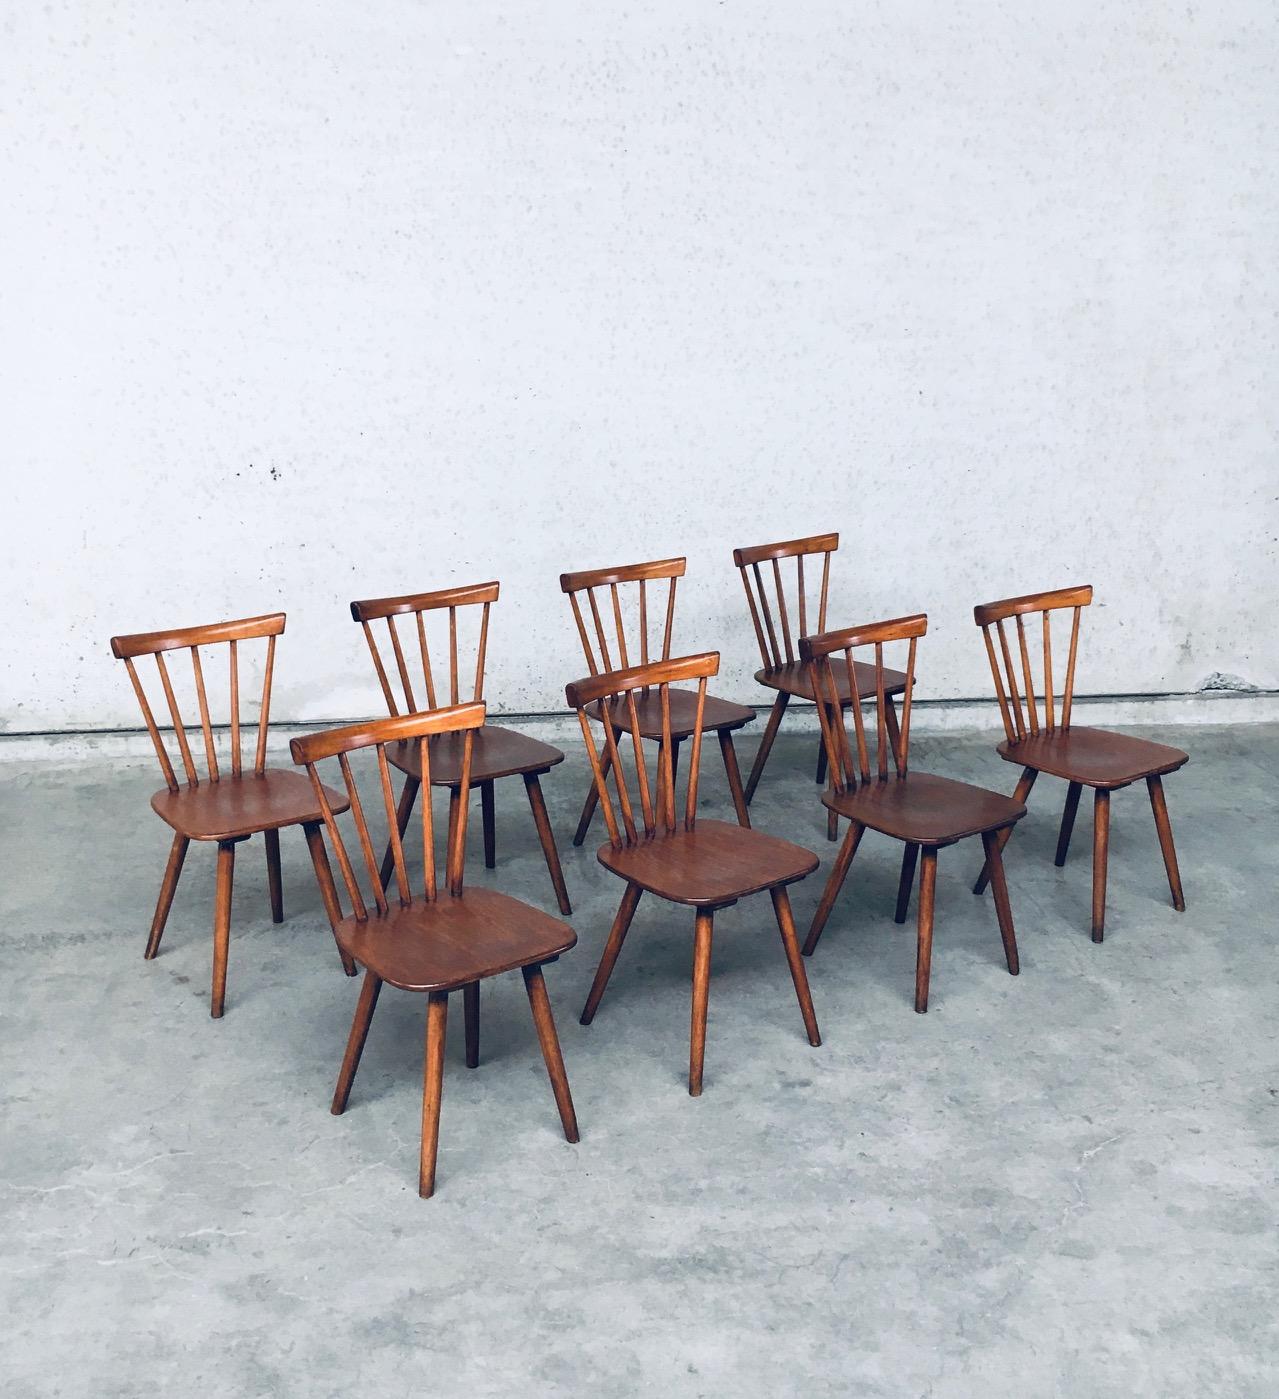 Vintage Midcentury Dutch Design Spindle Back Café Chairs by Vervoort Tilburg. Made in the Netherlands, 1950's / 60's. Set of 8 chairs. Elm or Beech constructed chairs with stamp of their maker on the bottom (faded on most chairs). All chairs are in